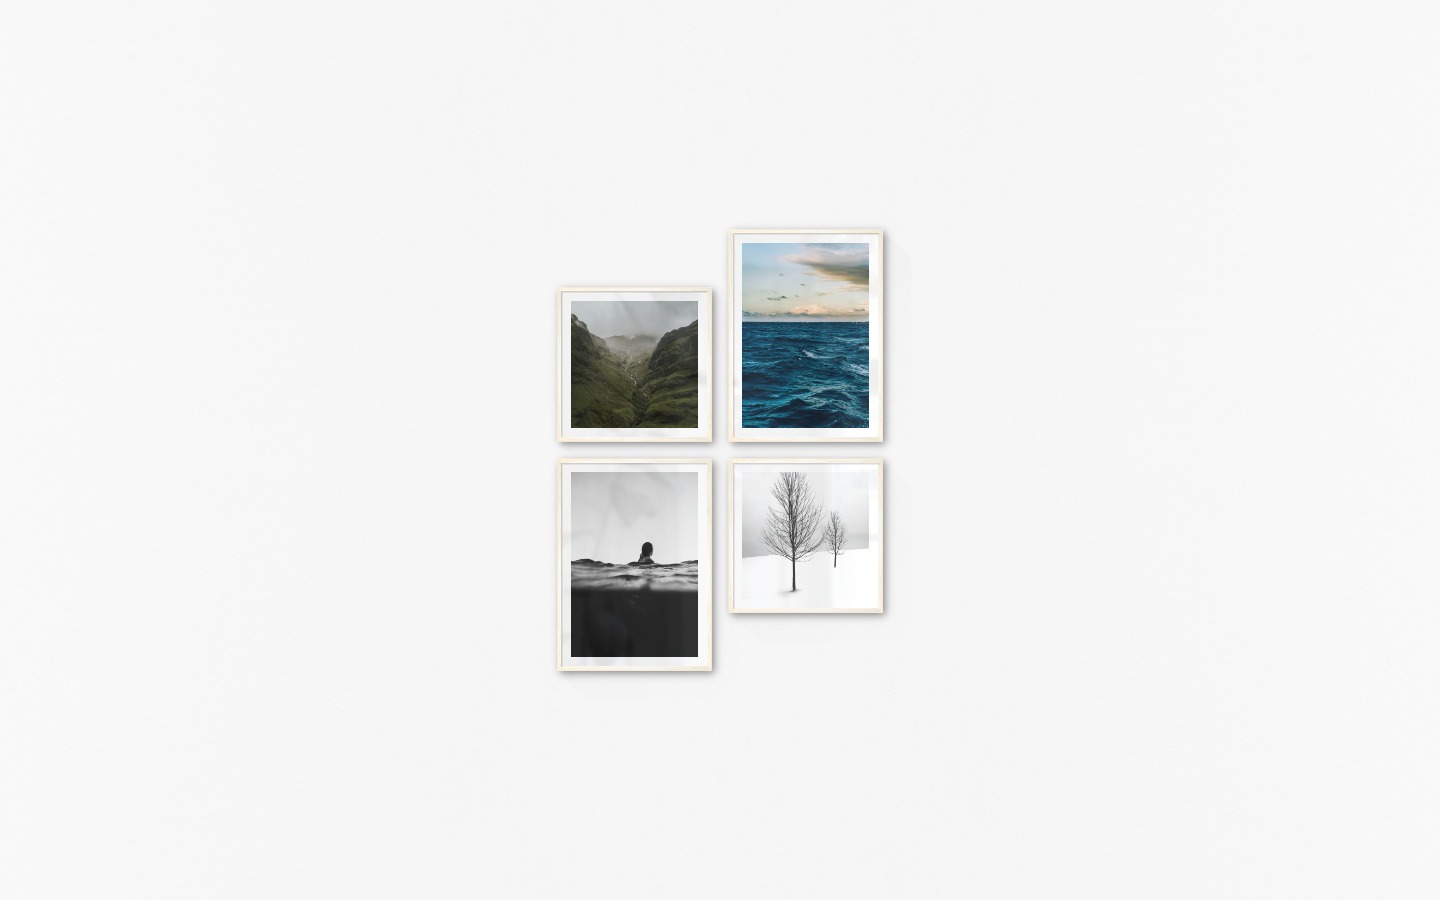 Gallery wall with picture frames in light wood in sizes 50x50 and 50x70 with prints "Stream in valley", "Somewhat out at sea", "Person in the water" and "Trees in the snow"